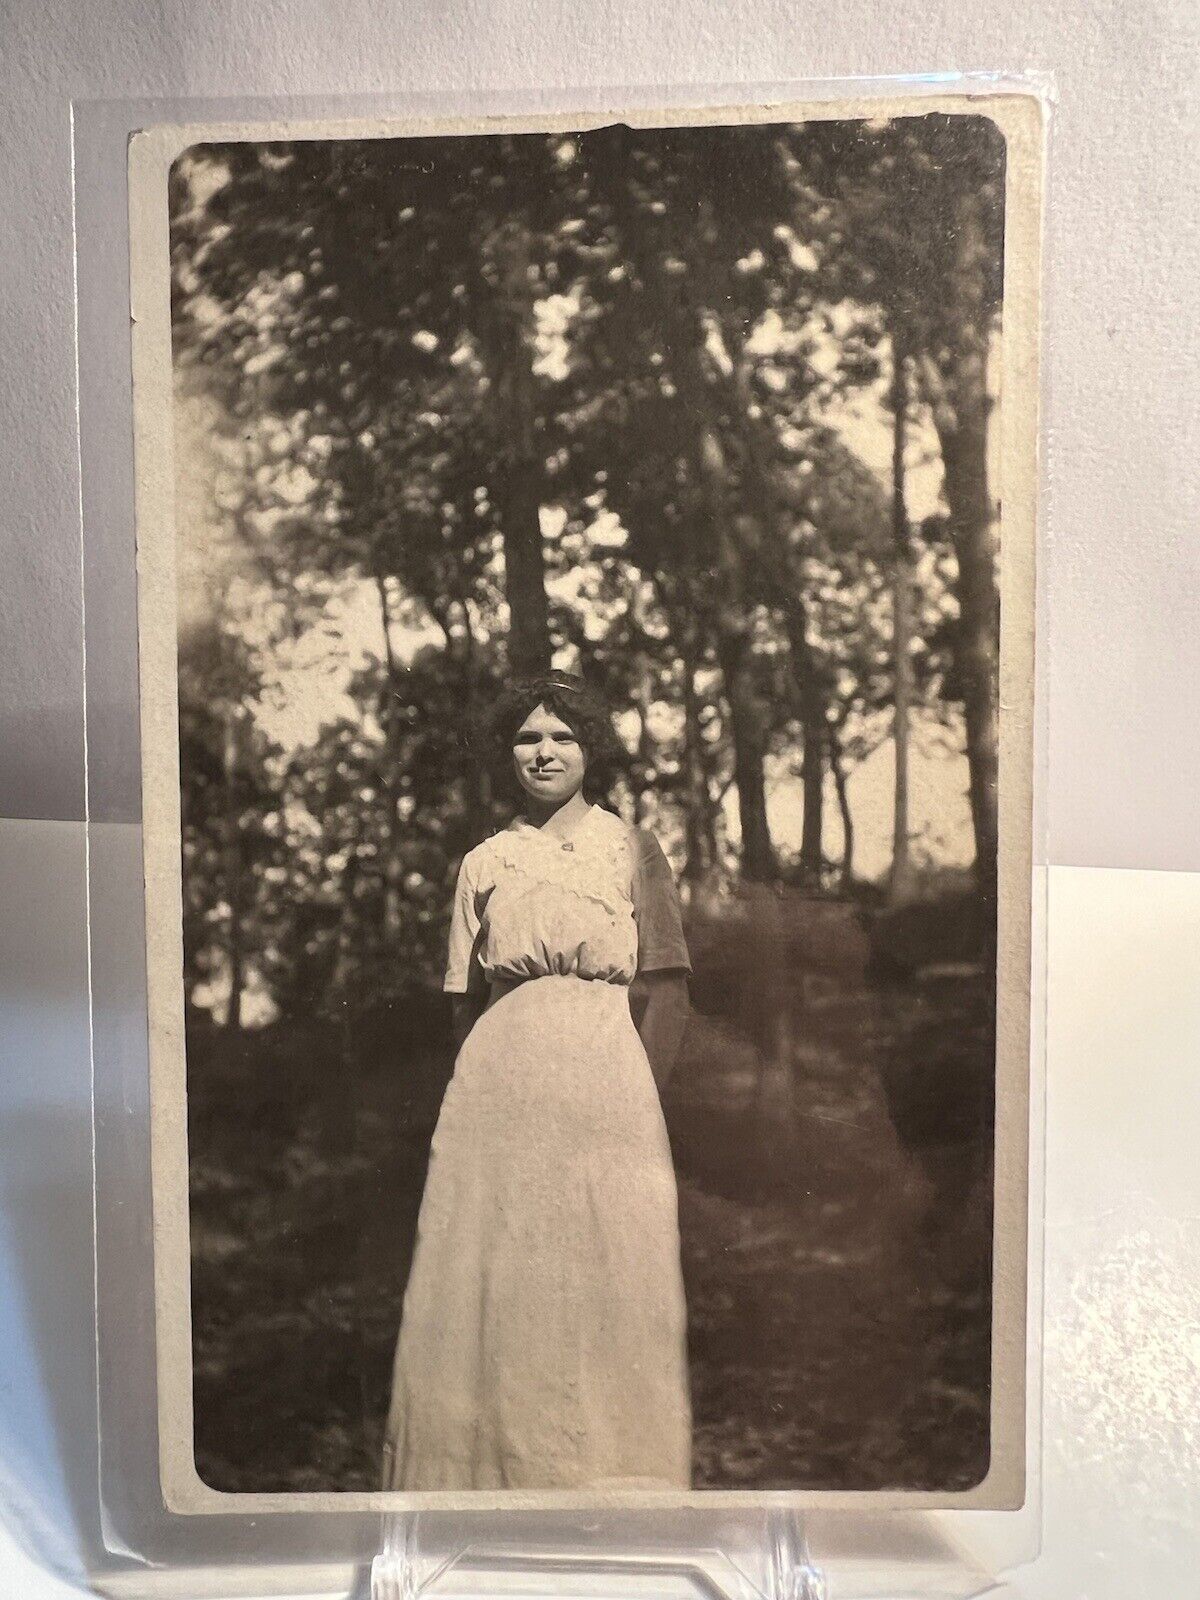 RPPC - Girl Wearing White Dress in the Woods - Vintage Postcard